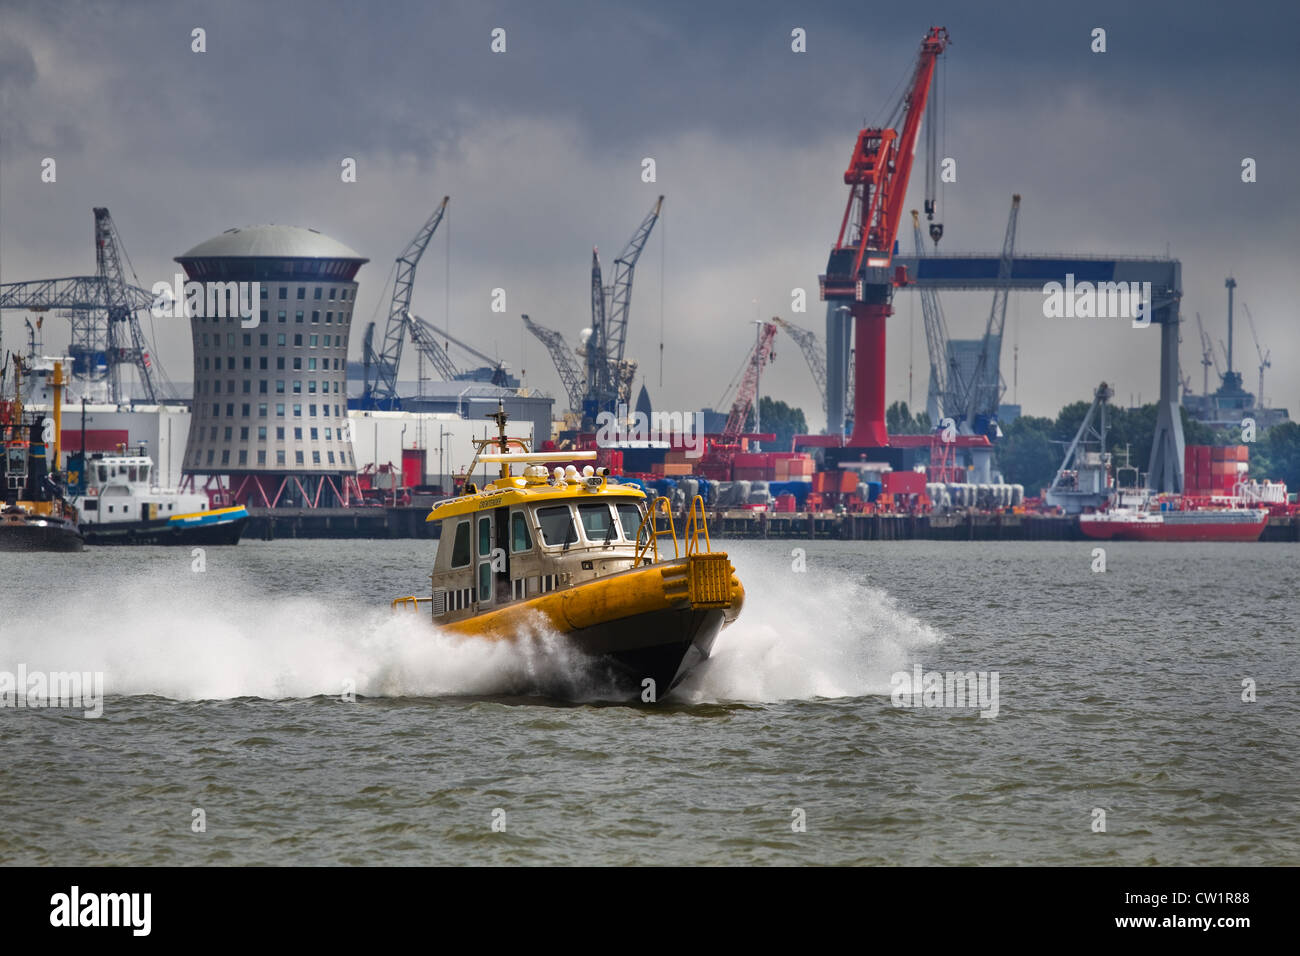 Crewtender on the river with industrial background and upcoming rainstorm Stock Photo